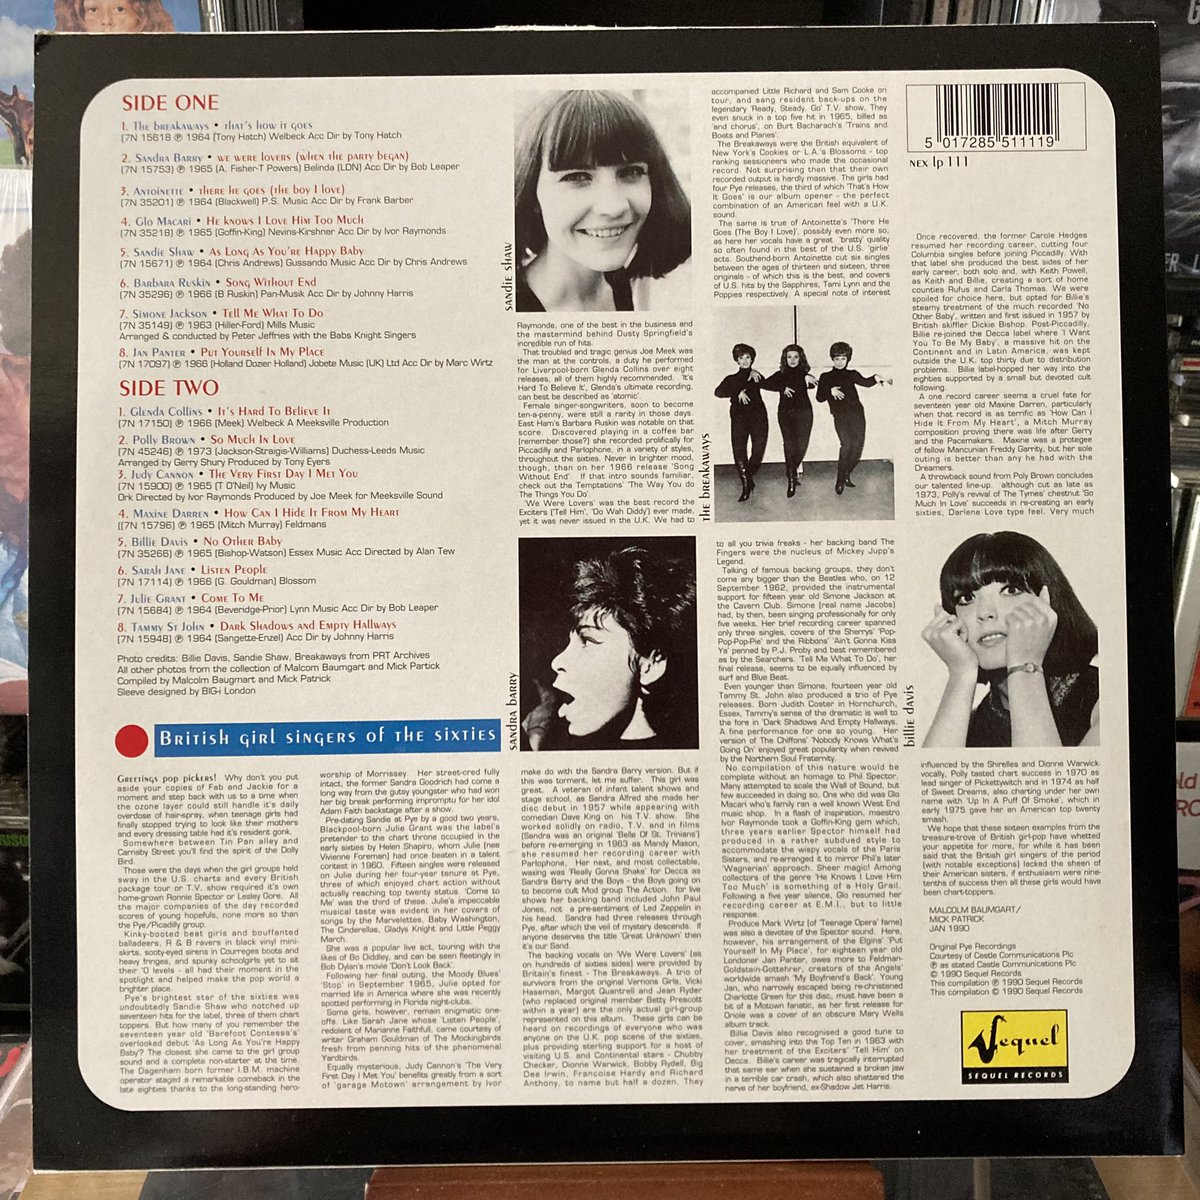 V.A./Here Come The Girls-British Girl Singers Of The Sixties
#nowplaying 
#vinyl #records #recordcollection
#cds #cdcollection
#herecomethegirls